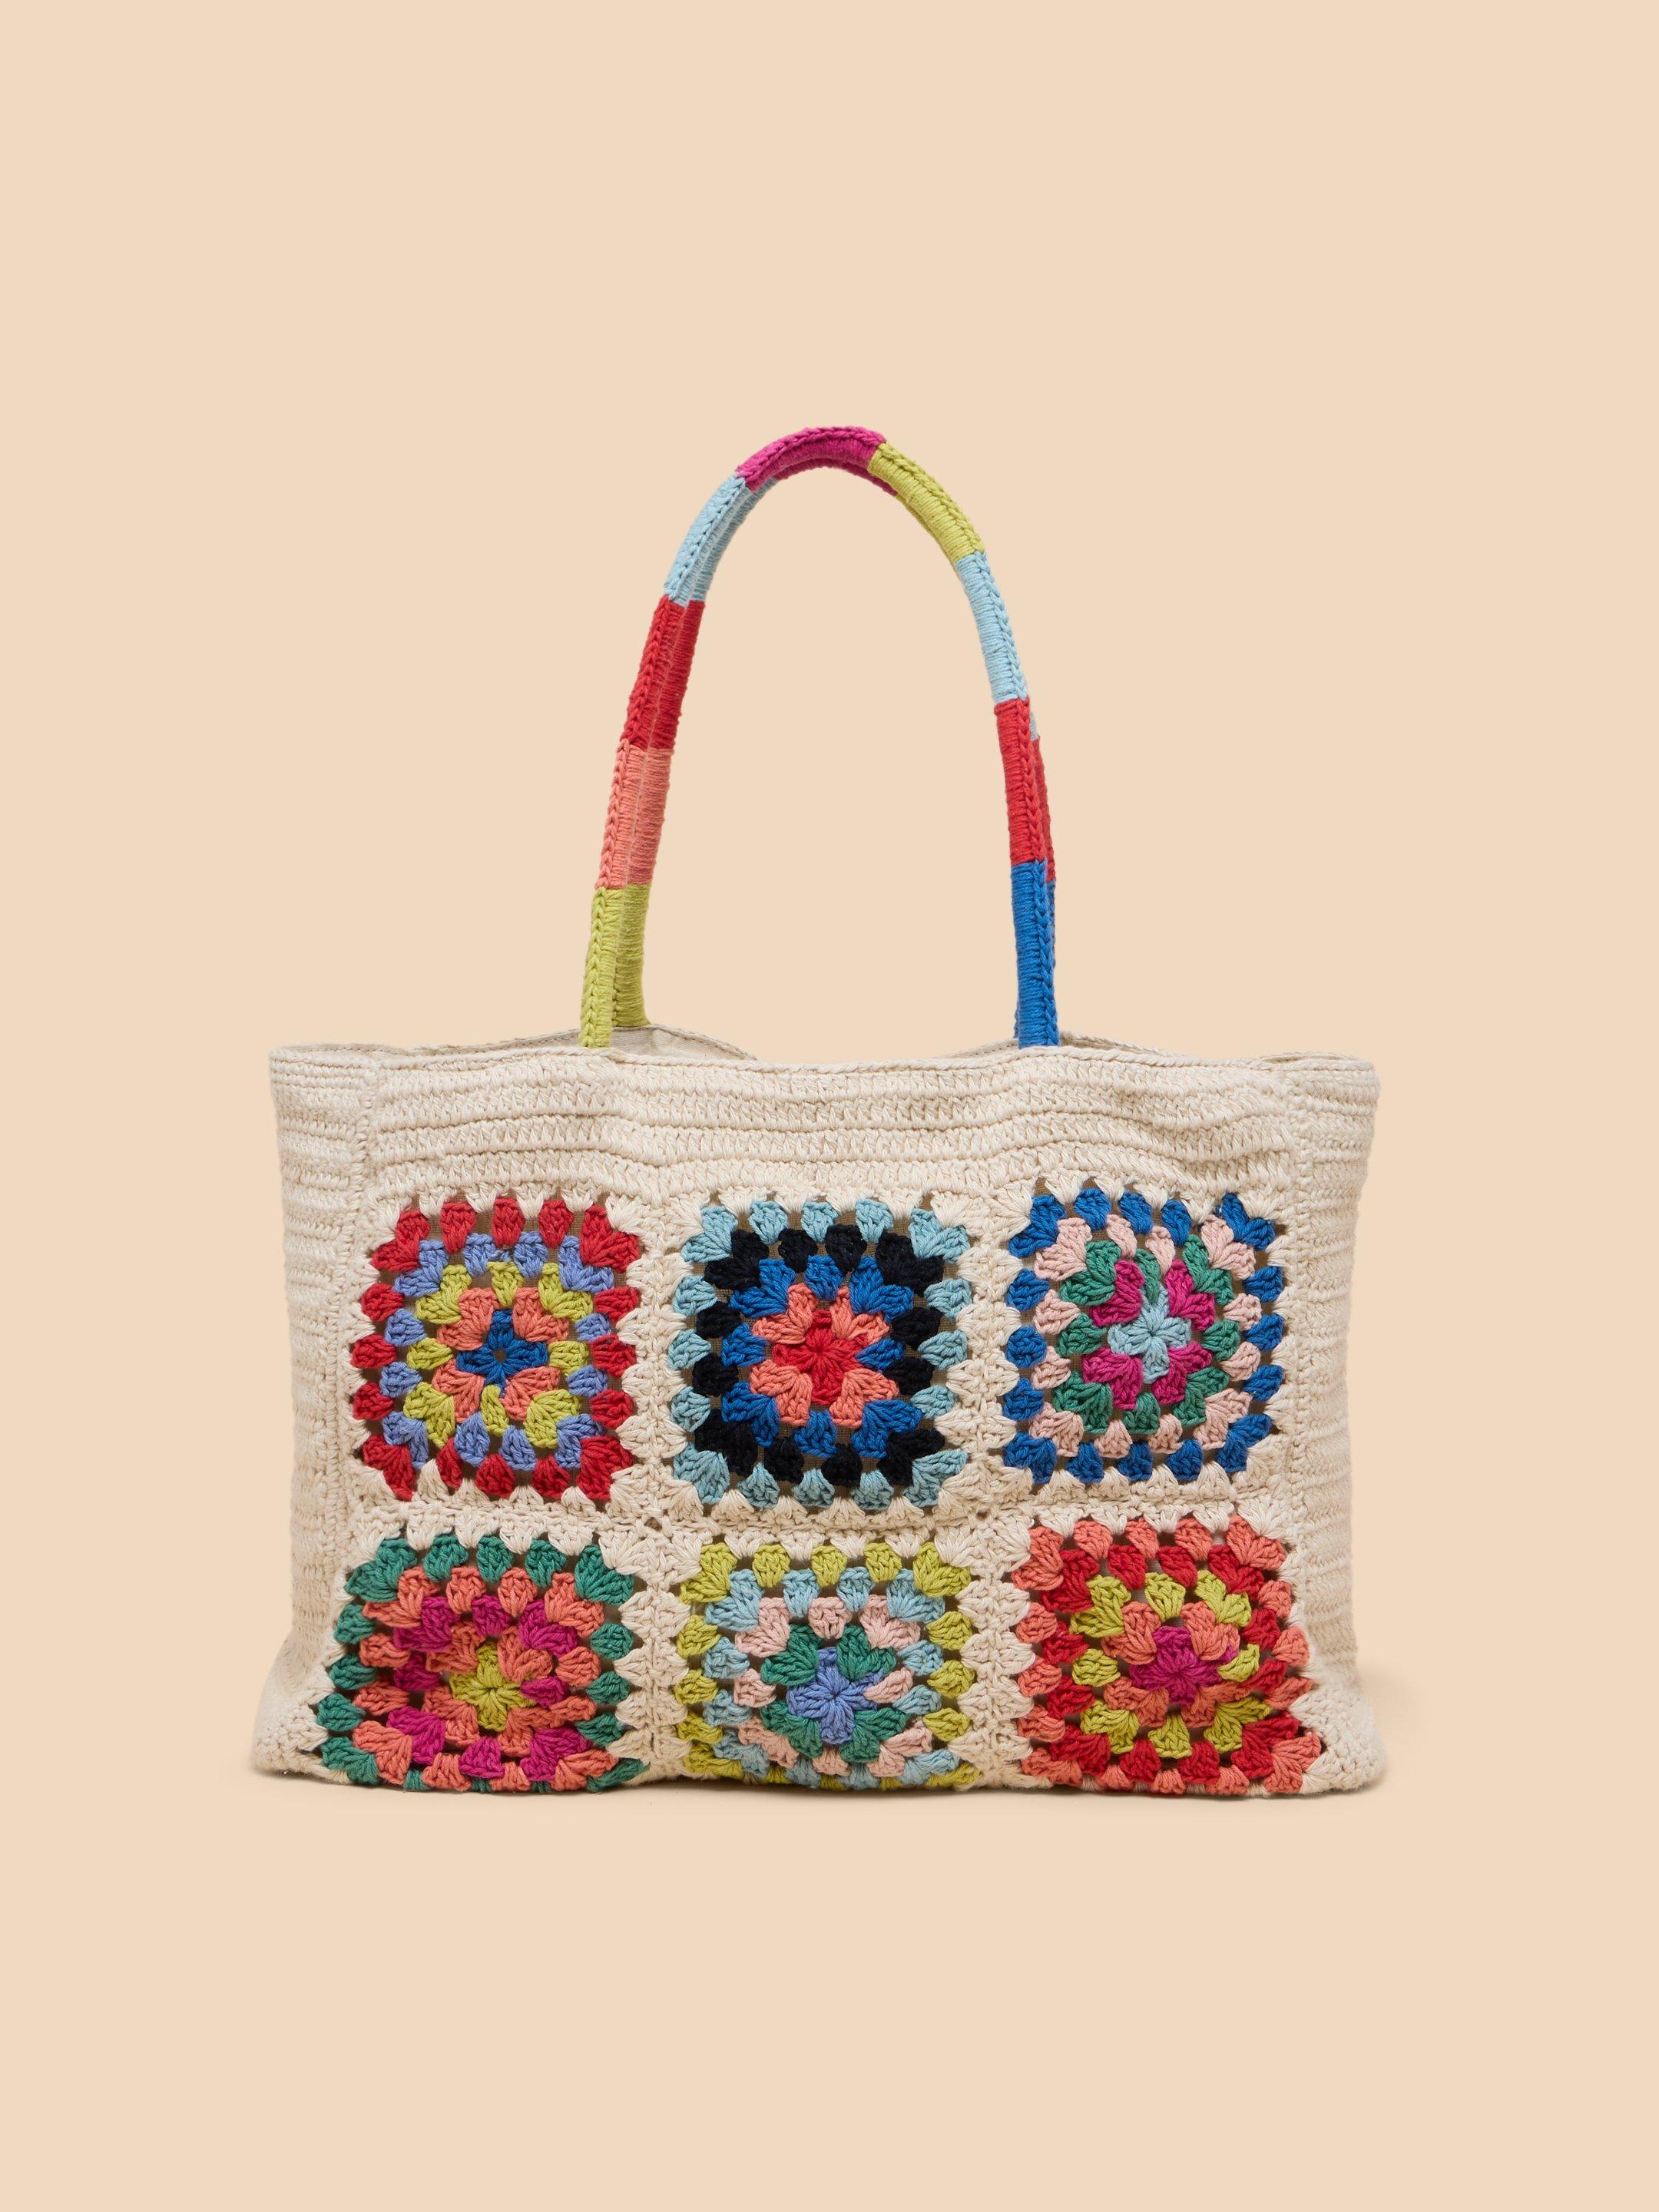 Callie Crochet Tote in NAT MLT - LIFESTYLE